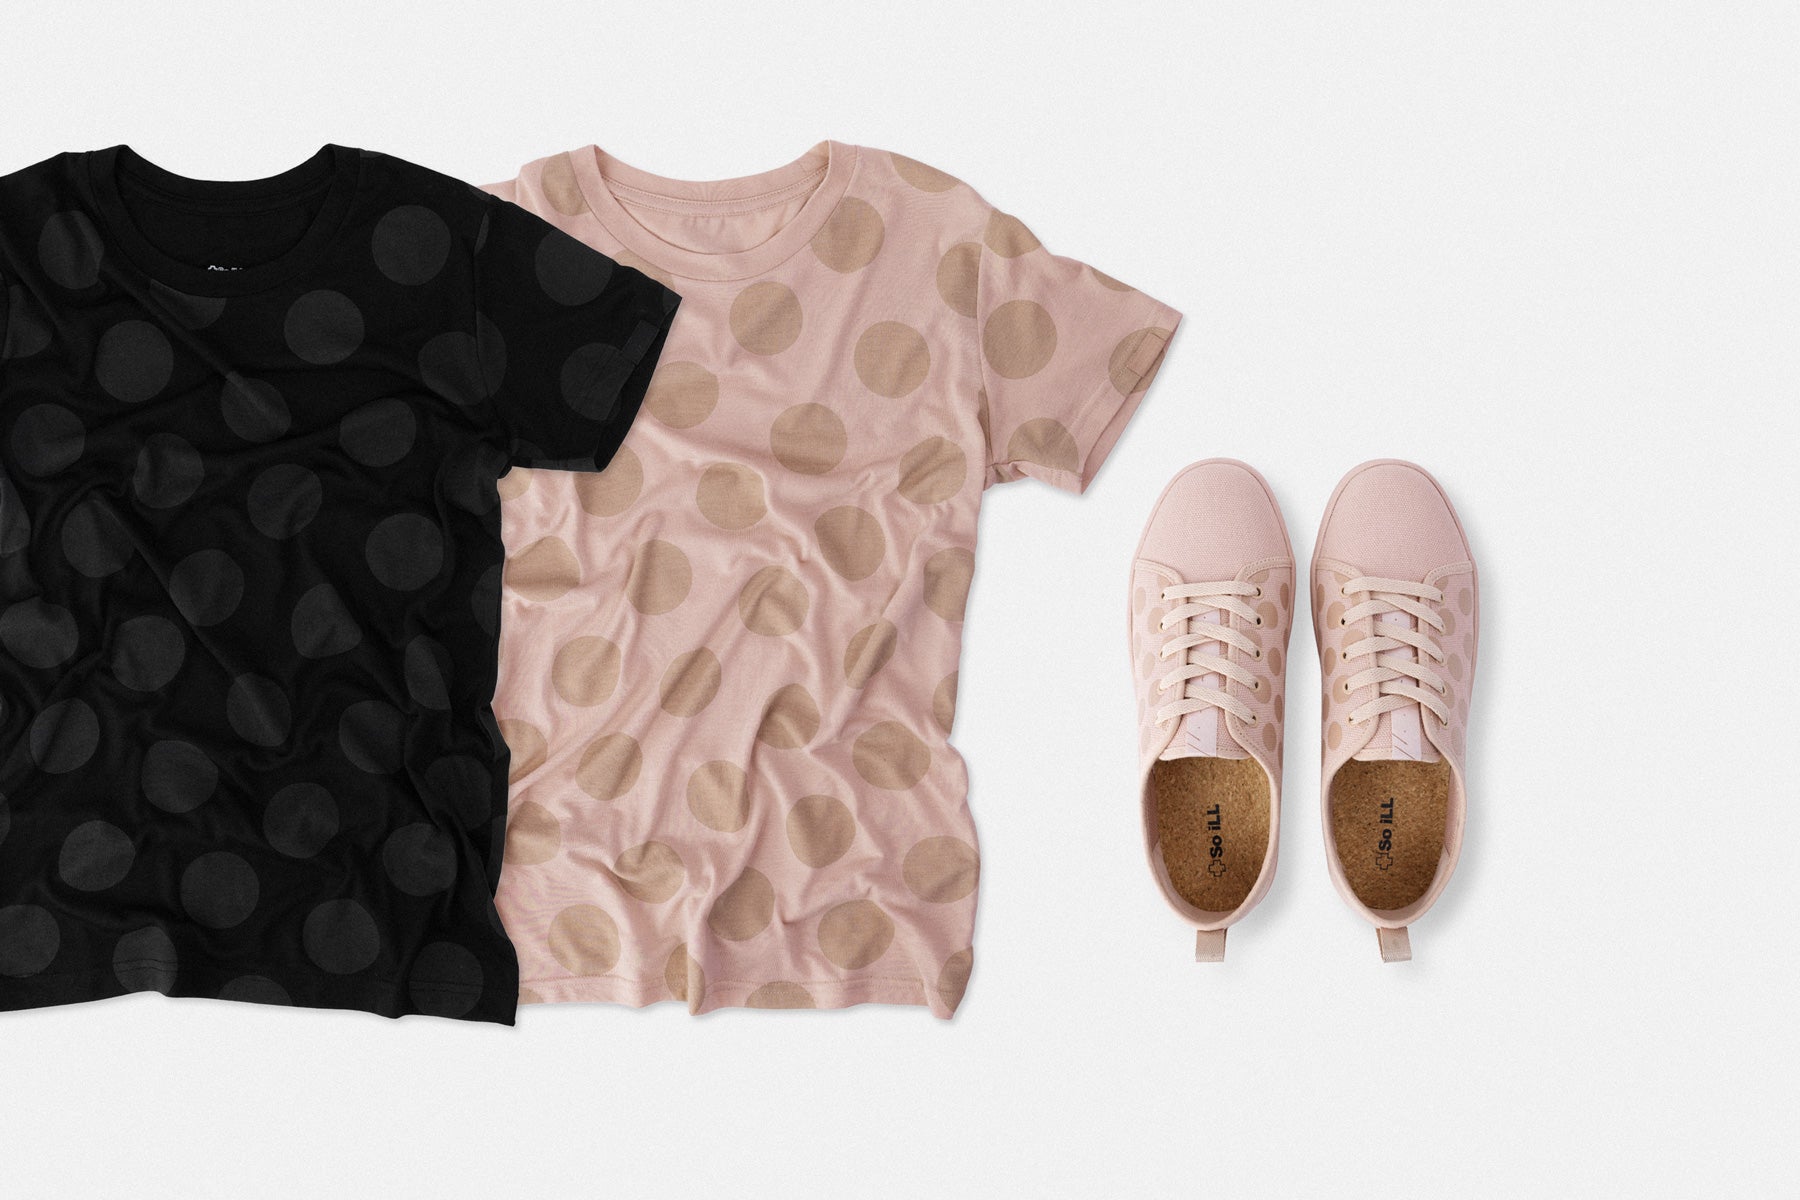 So iLL x On The Roam polka dot shirts and shoes shown laid next to each other